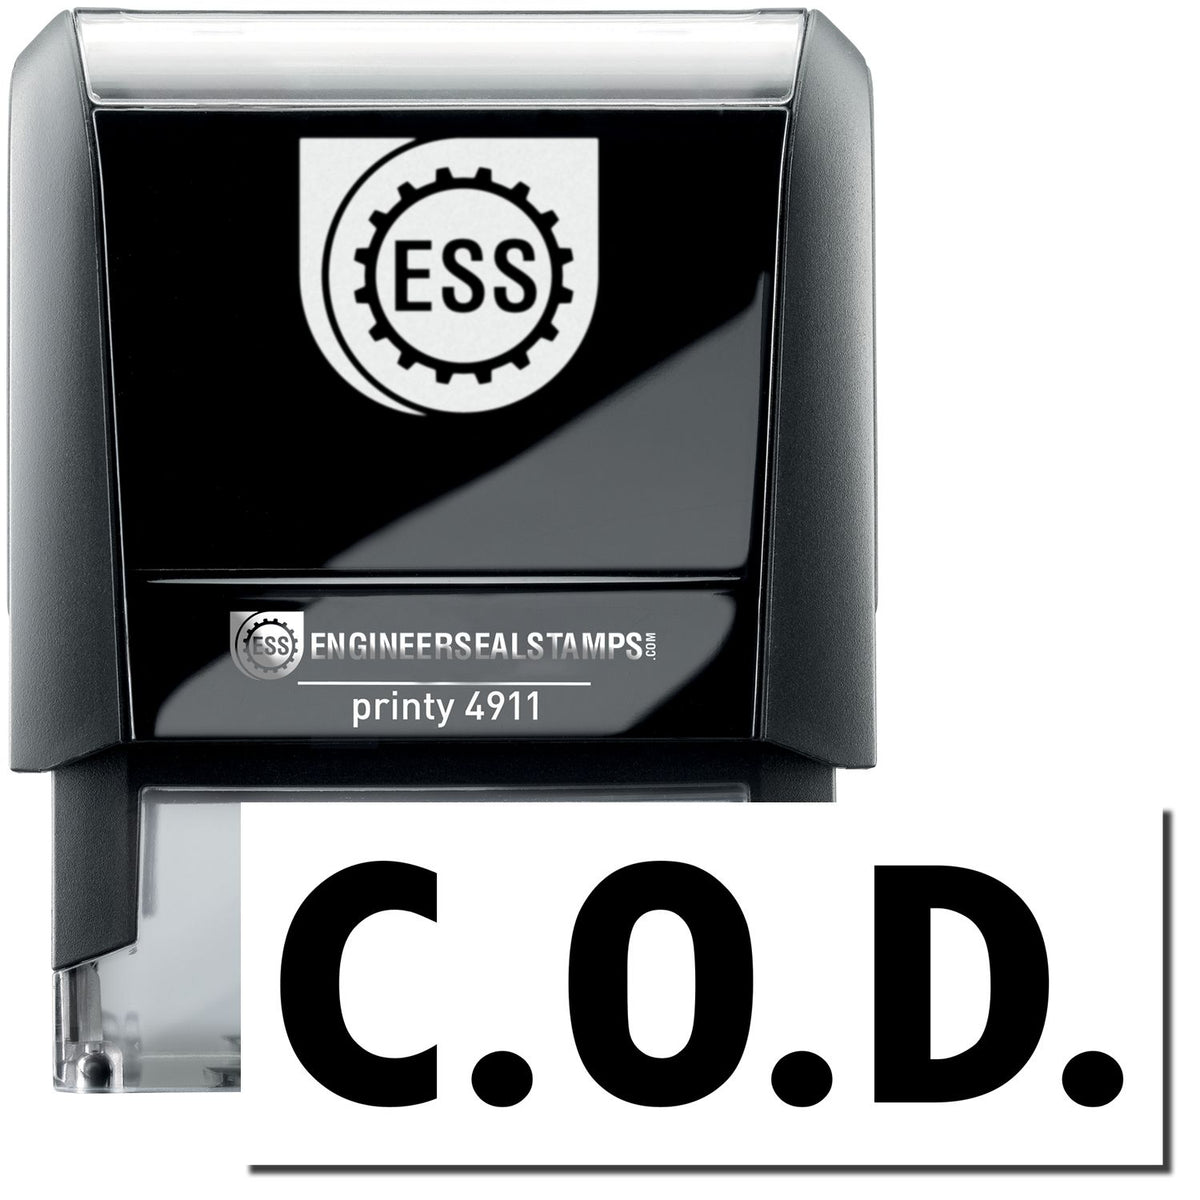 A self-inking stamp with a stamped image showing how the text &quot;C.O.D.&quot; is displayed after stamping.